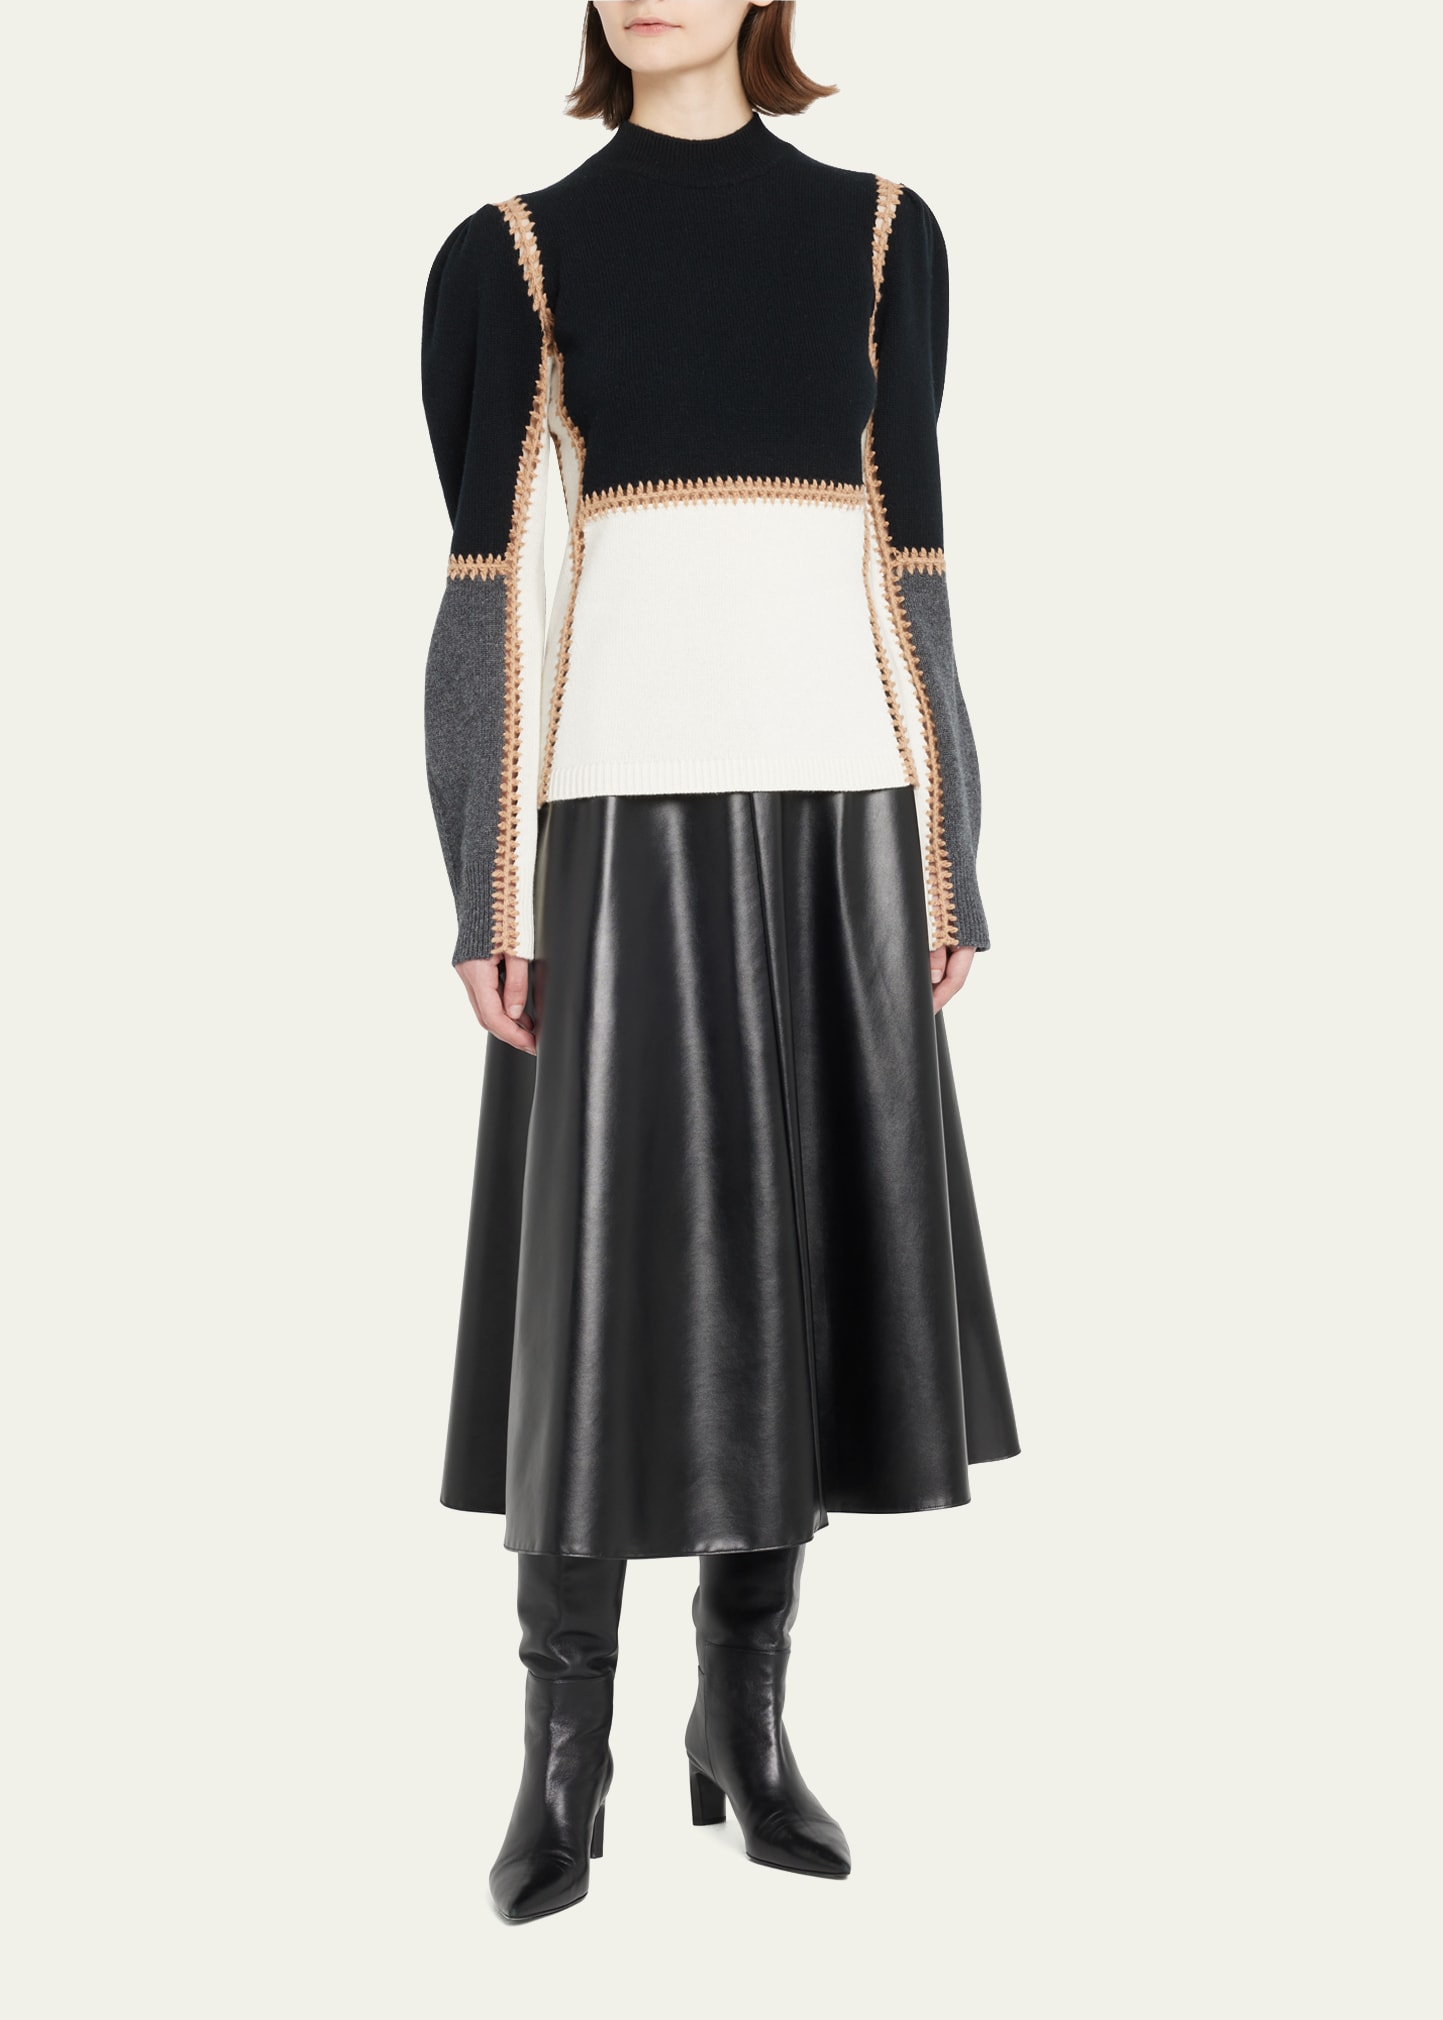 Cashmere Knit Colorblock Sweater with Contrast Stitching